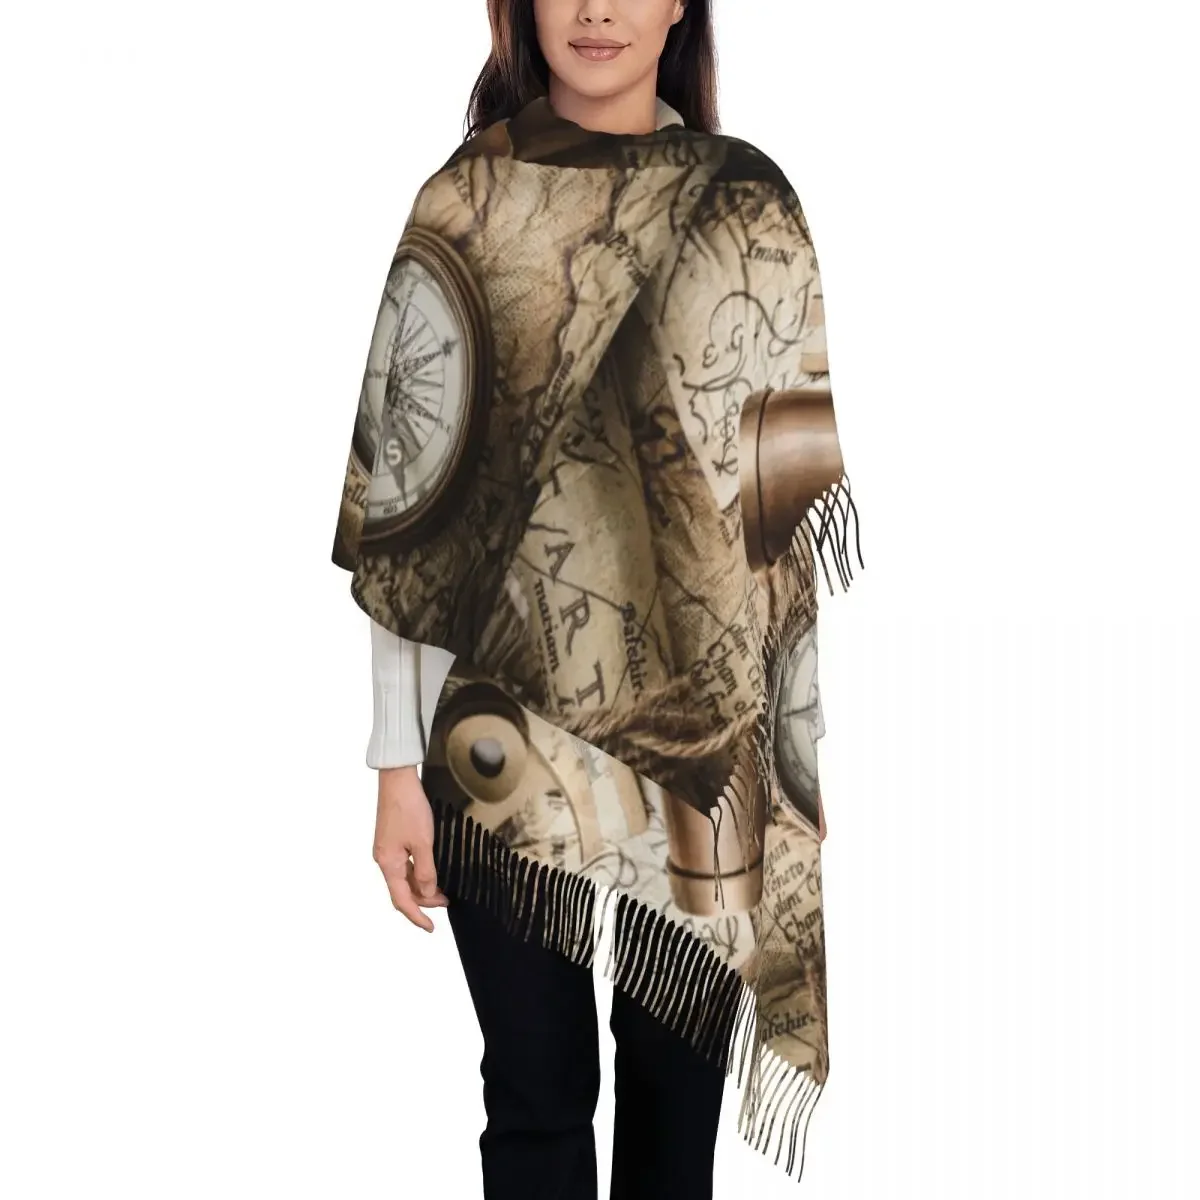 

Vintage Compass Sextant Spyglass And Old Map Women's Pashmina Shawl Wraps Fringe Scarf Long Large